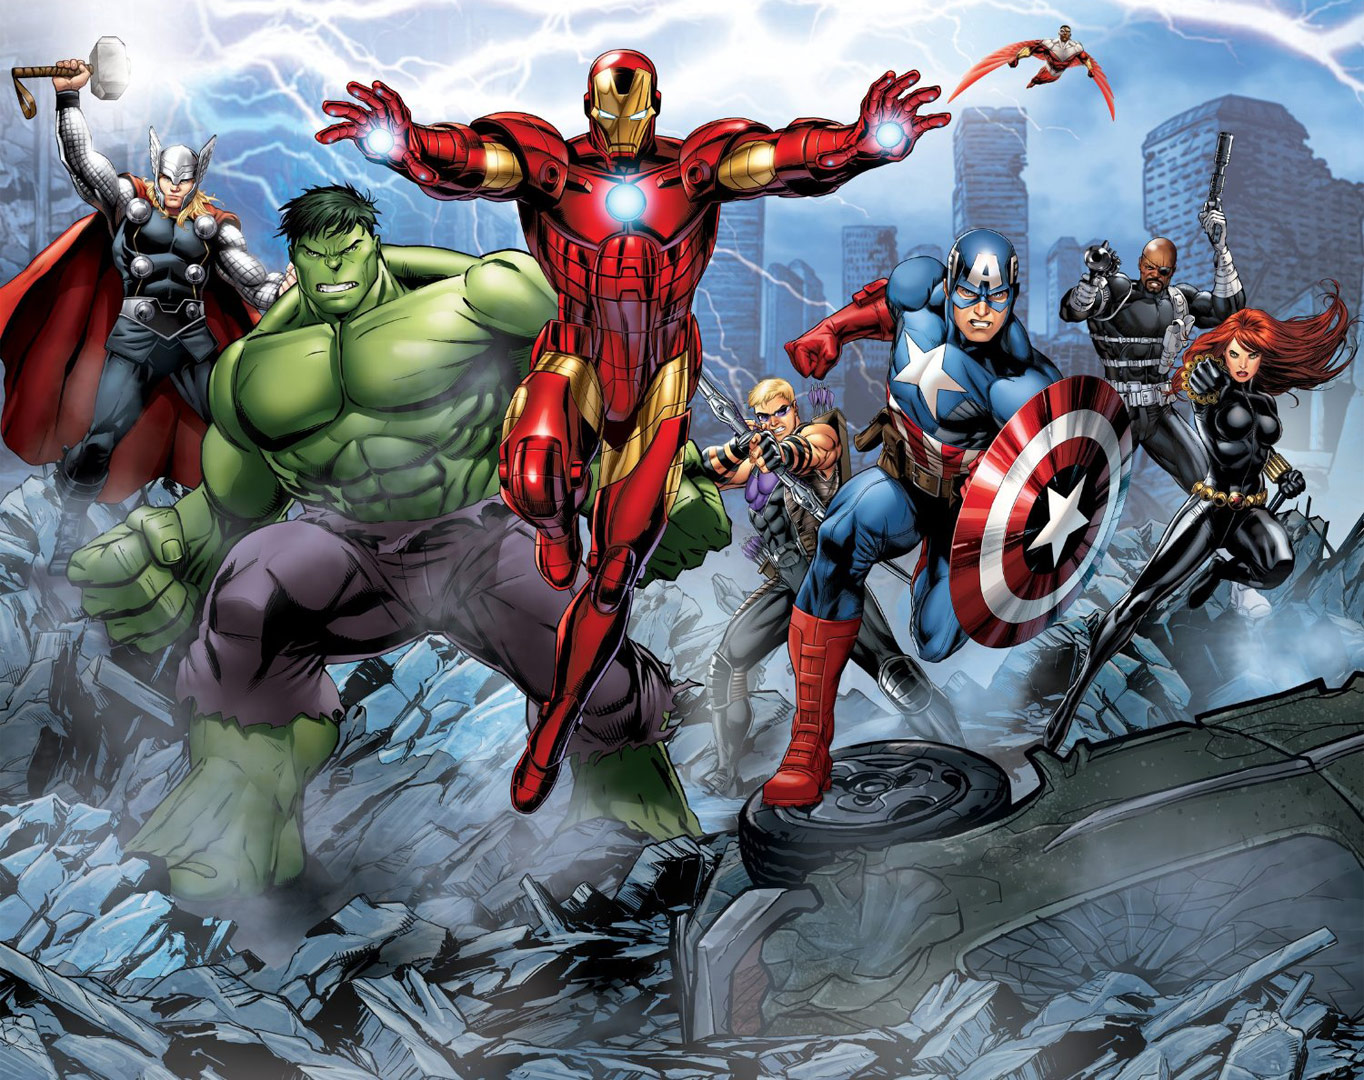 An Epic Battle In Your Home With The Avengers Assemble Full Wall Mural